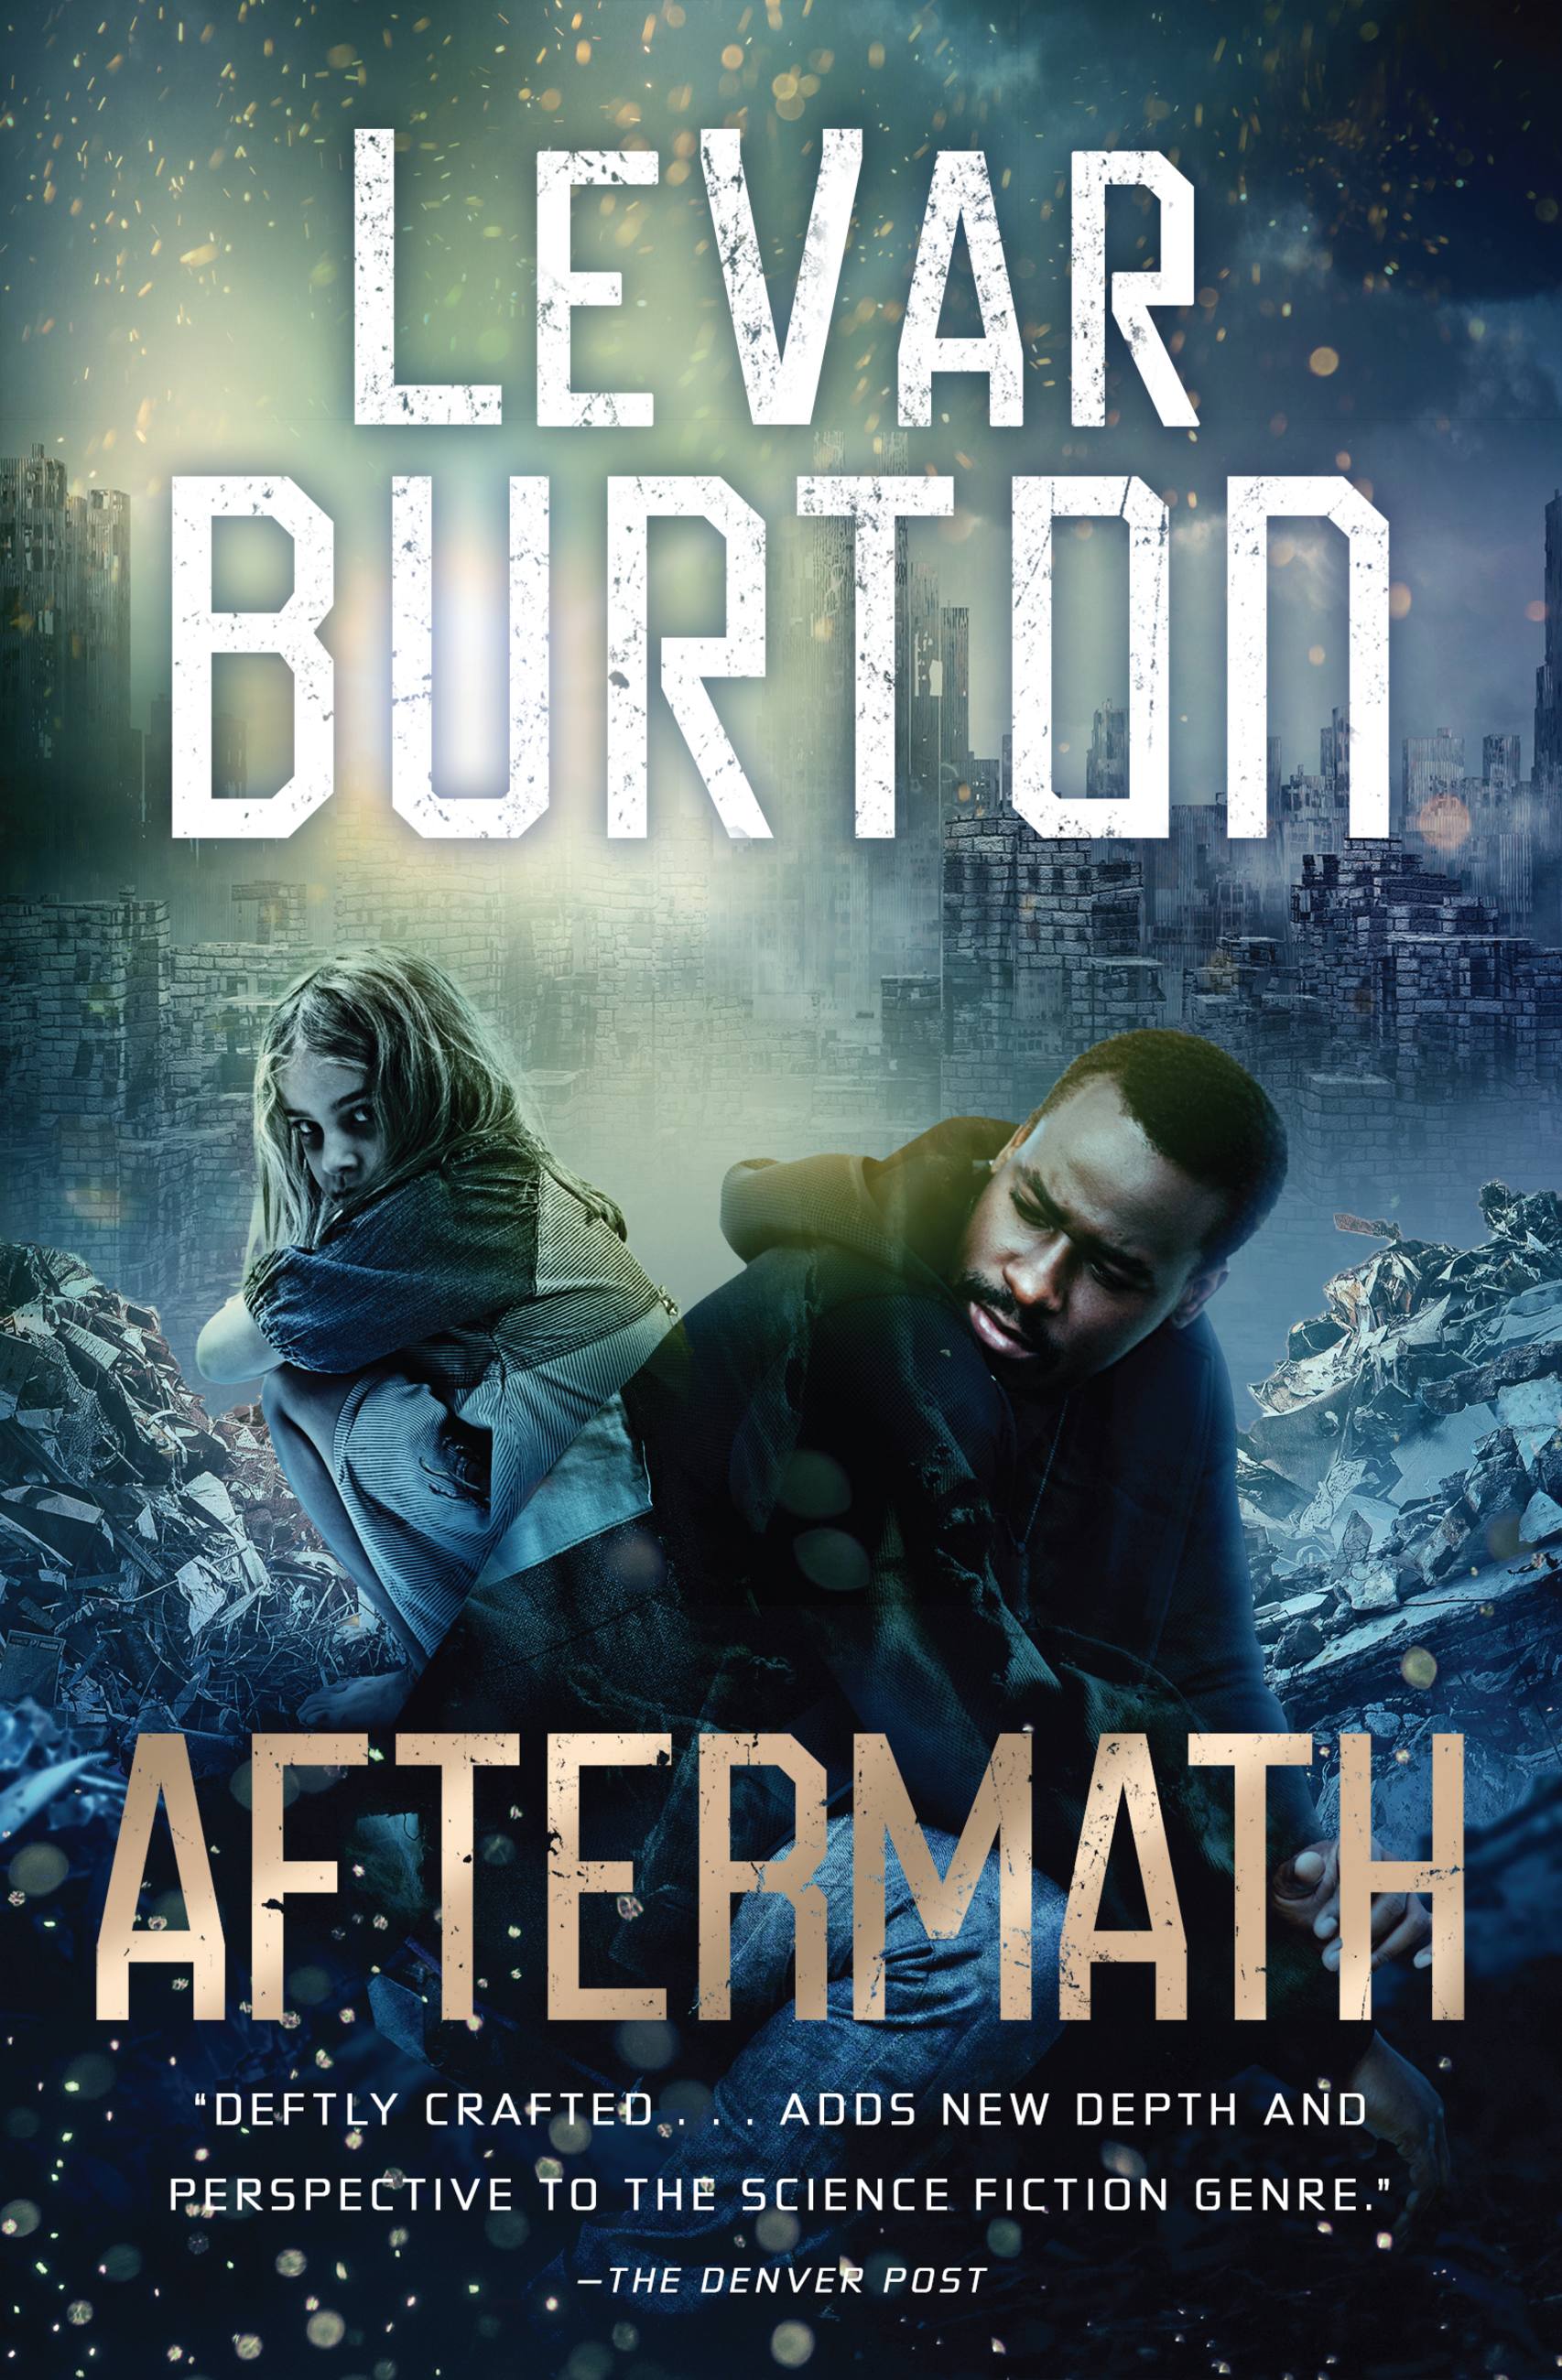 Aftermath by LeVar Burton Hachette Book Group pic pic